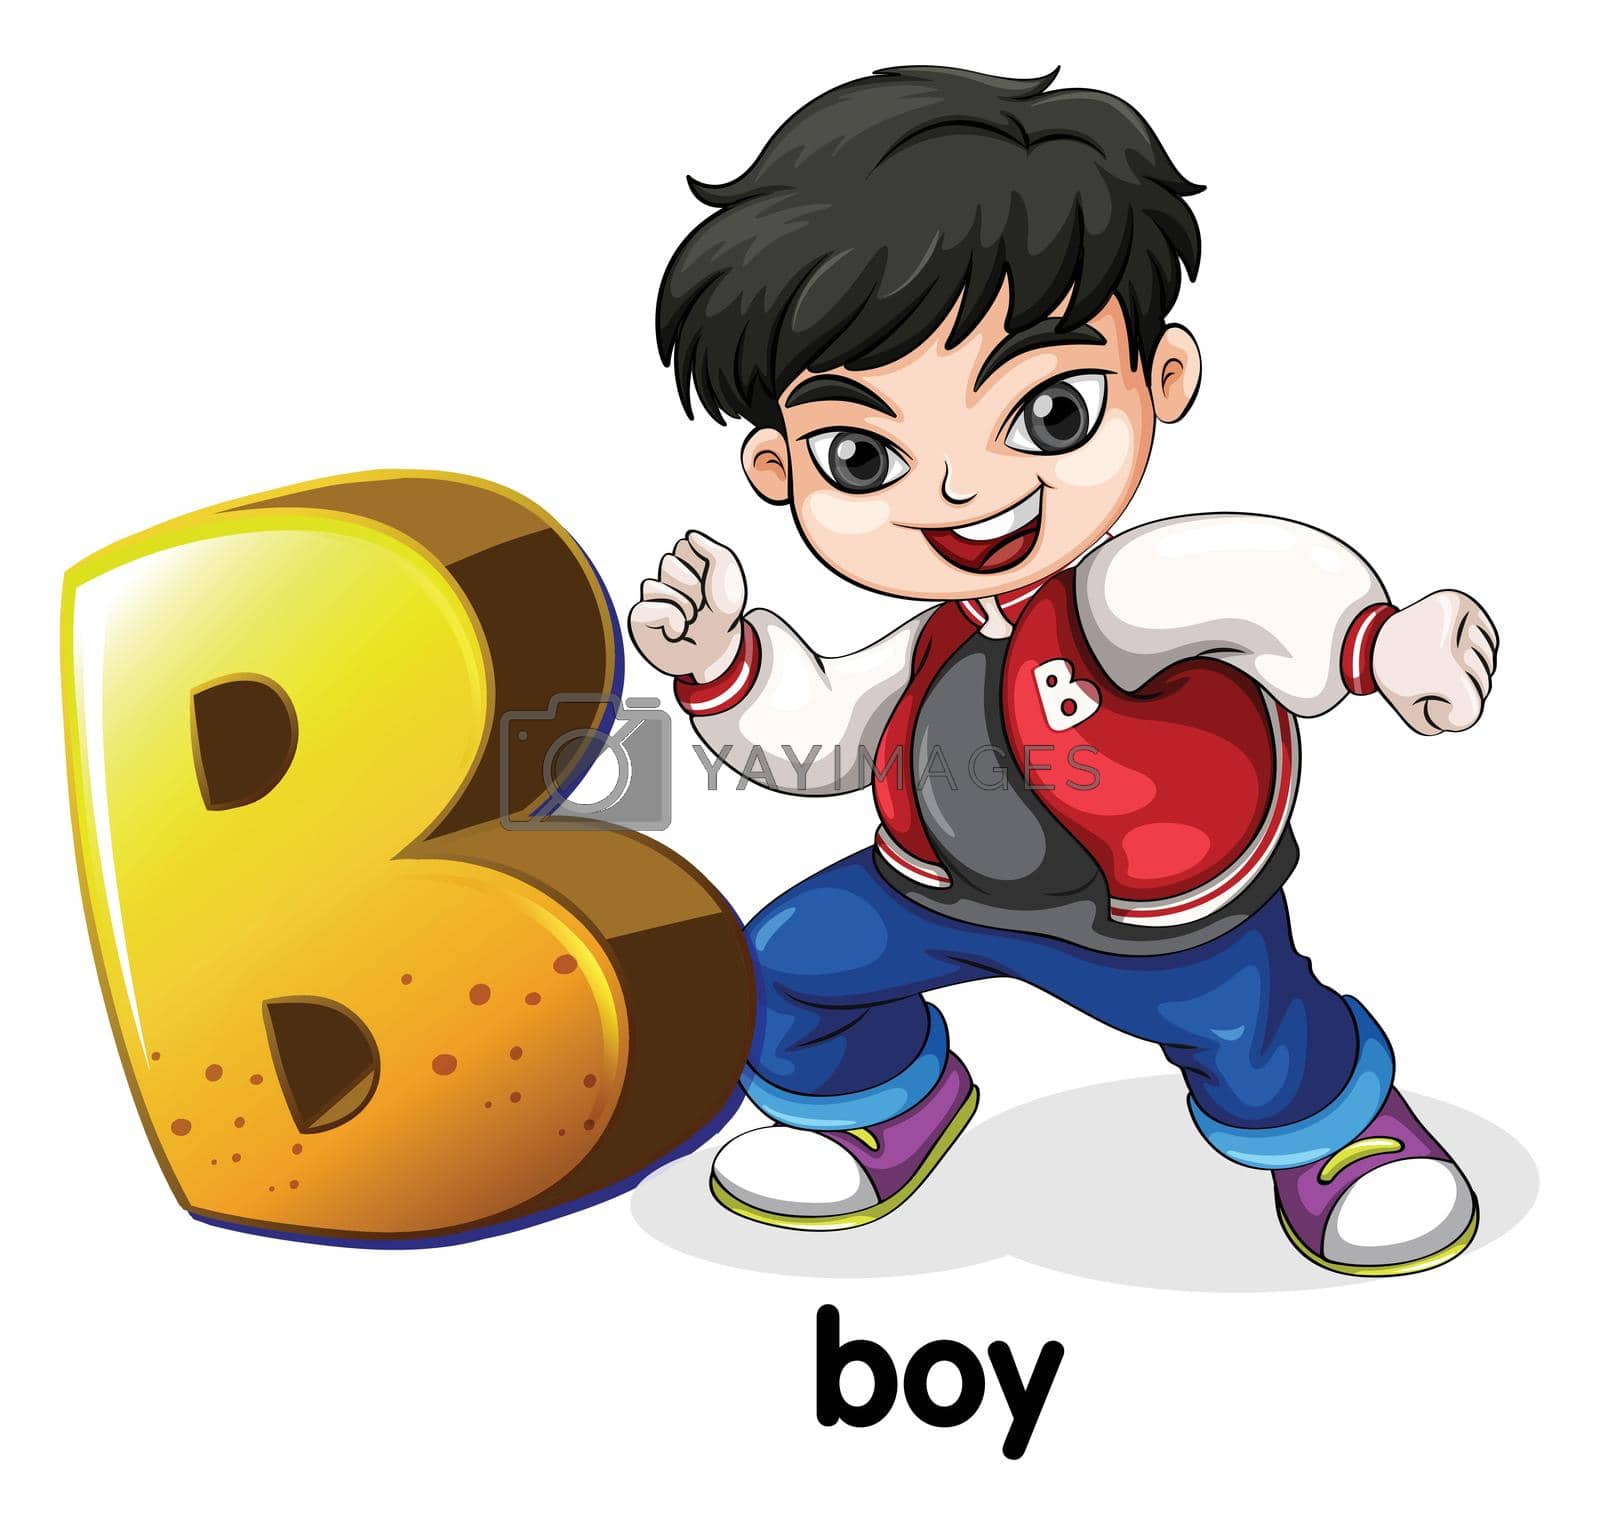 Royalty free image of A letter B for boy by iimages